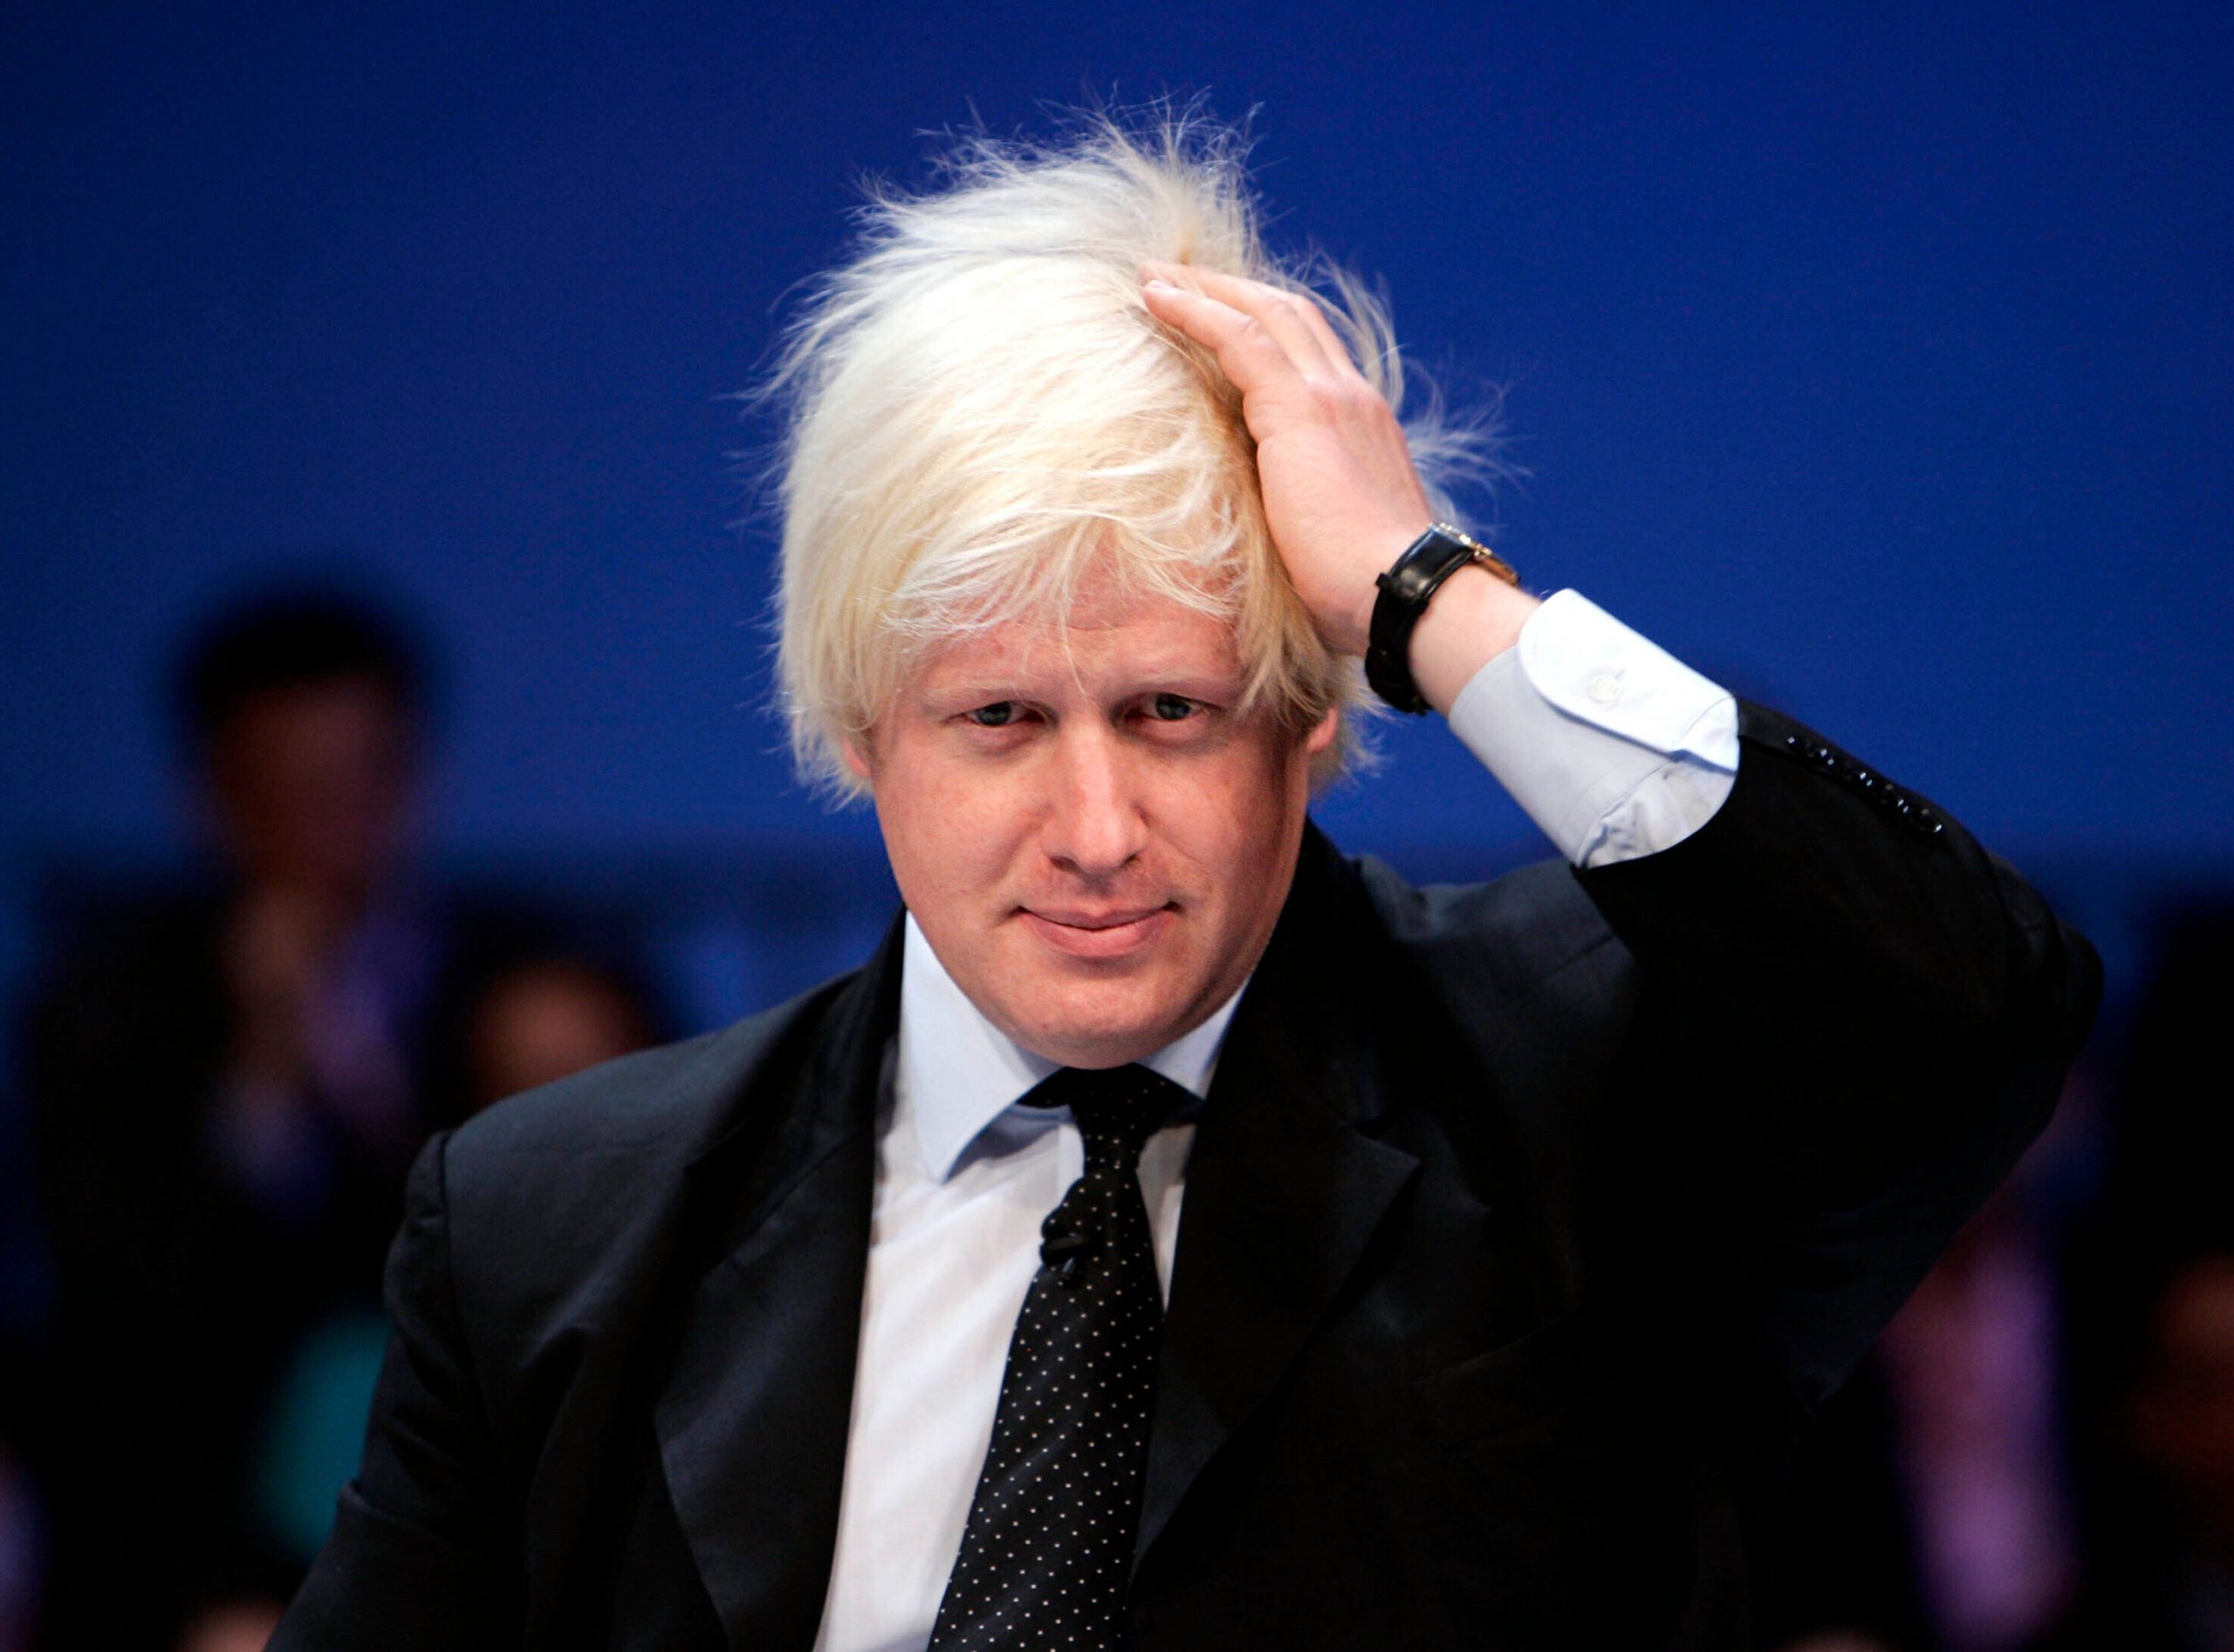 Boris Johnson pulls out of Tory race for UK PM